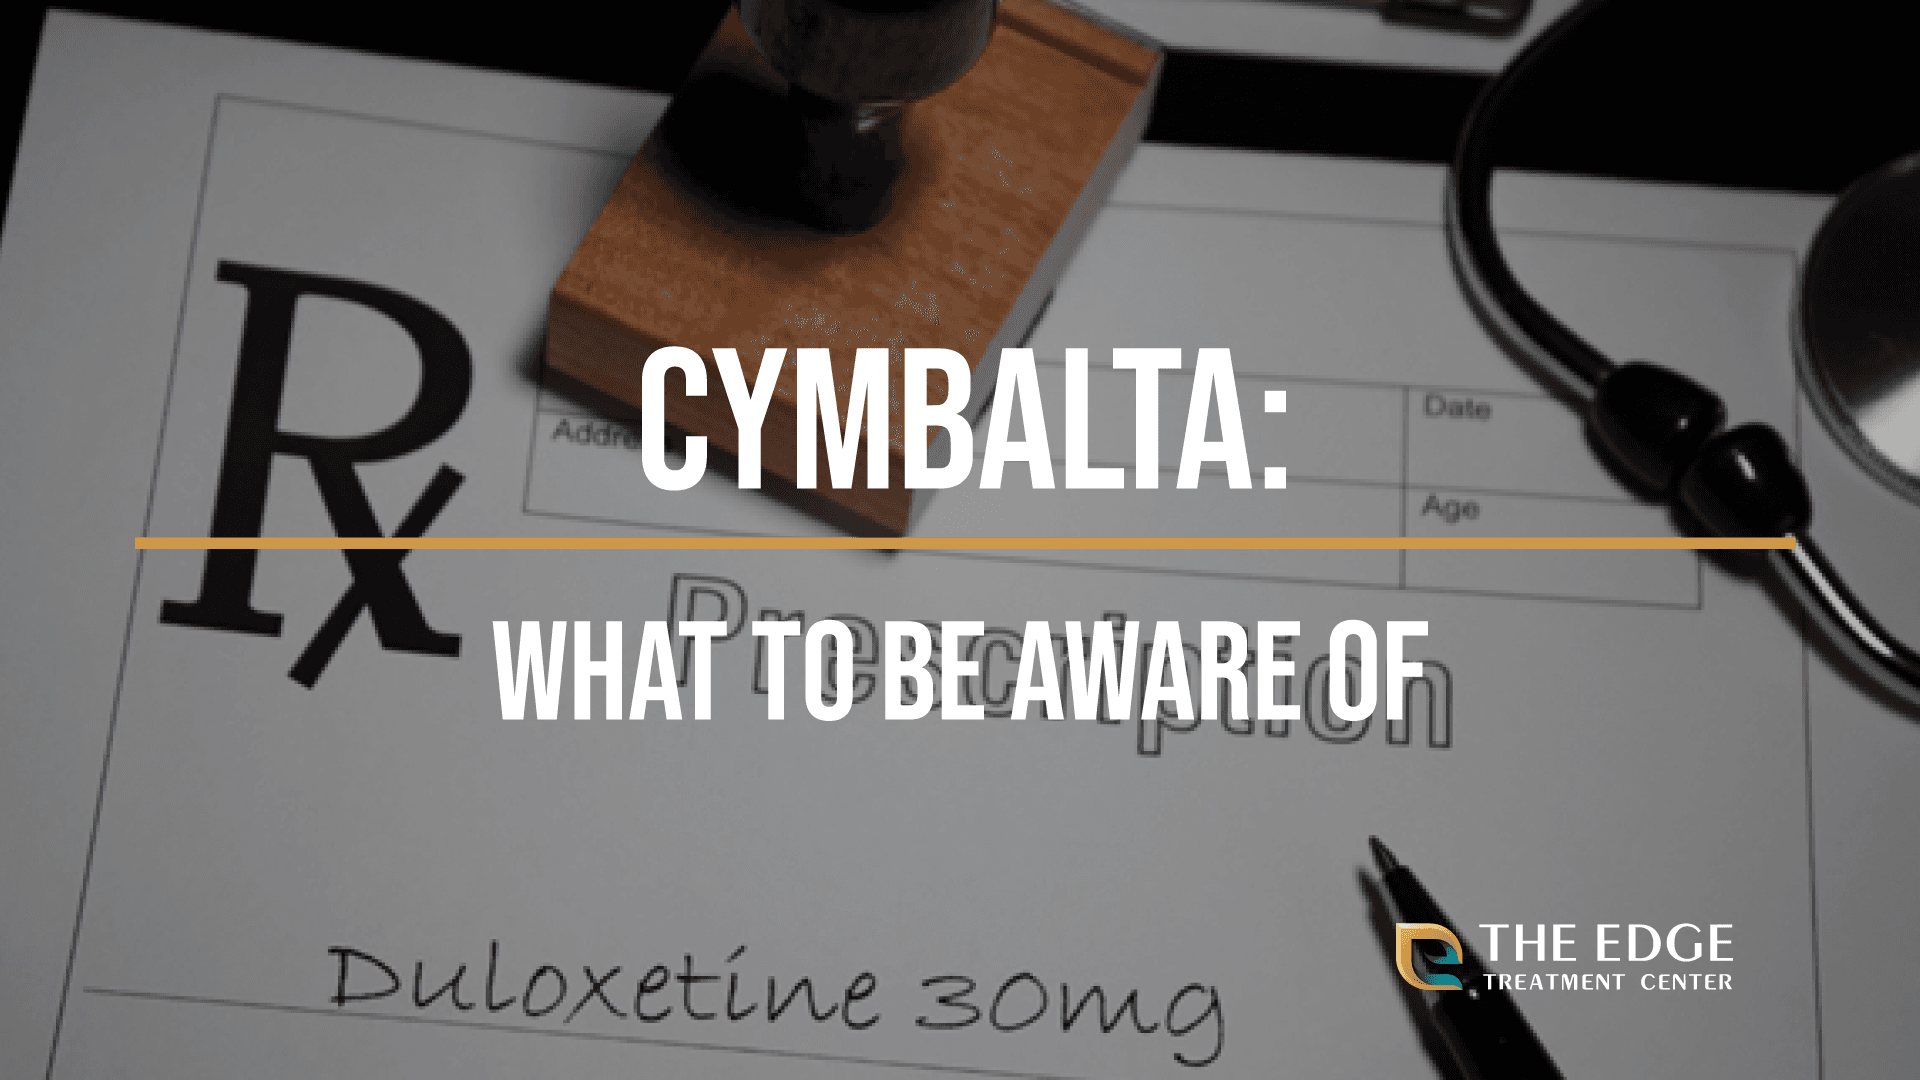 Cymbalta: Duloxetine Side Effects and More